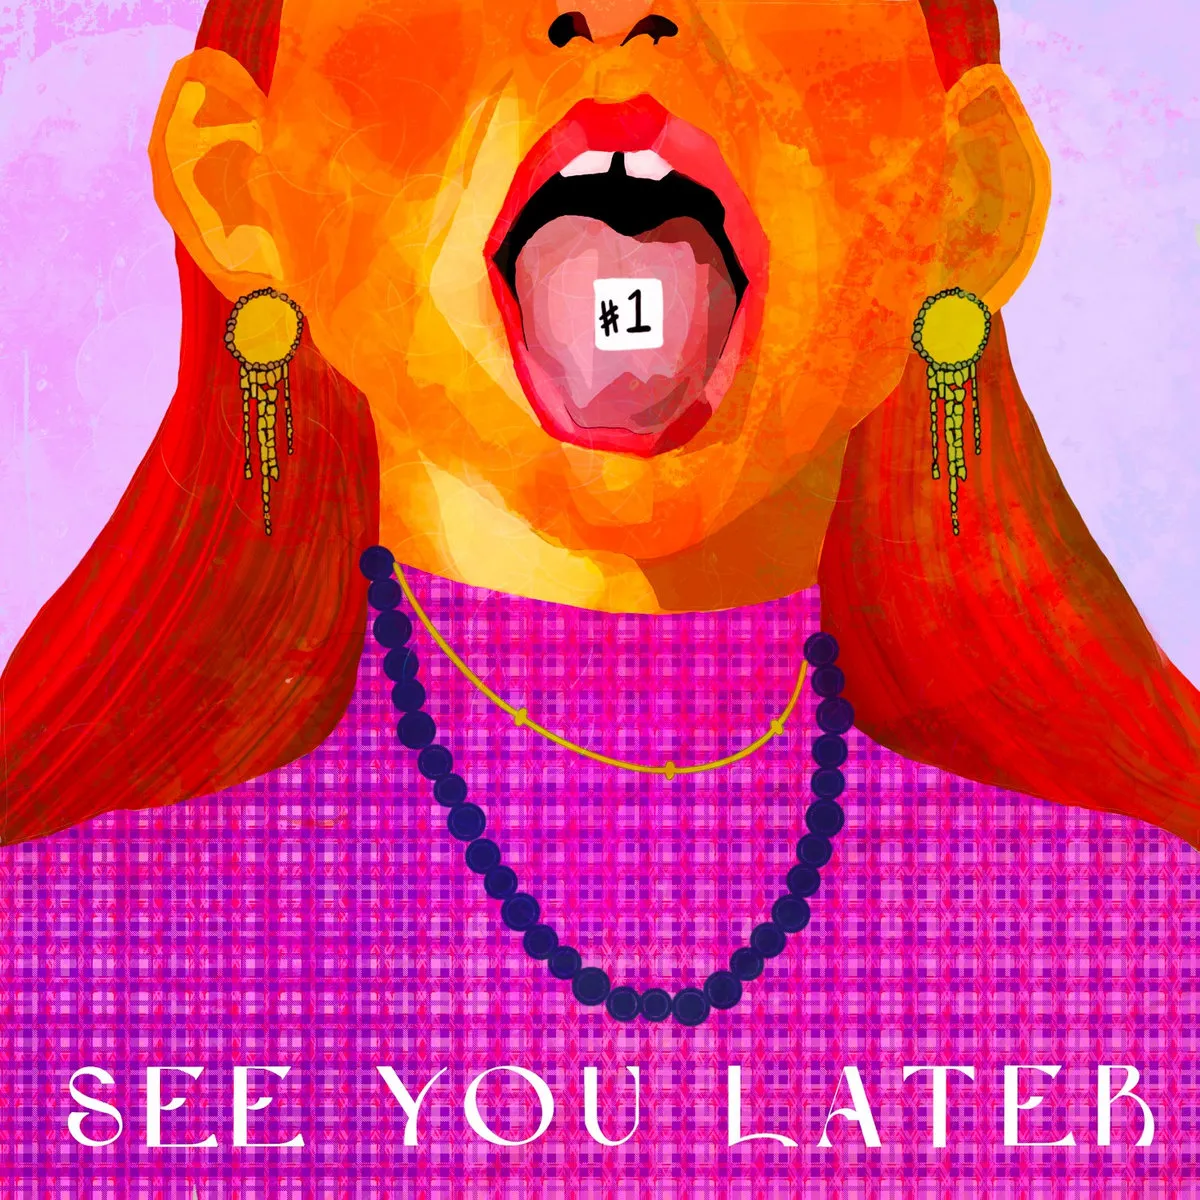 Album art for See You Later is a vivid illustration of a woman in bright pink sticking her tongue out, displaying a scrap of paper that says "#1."